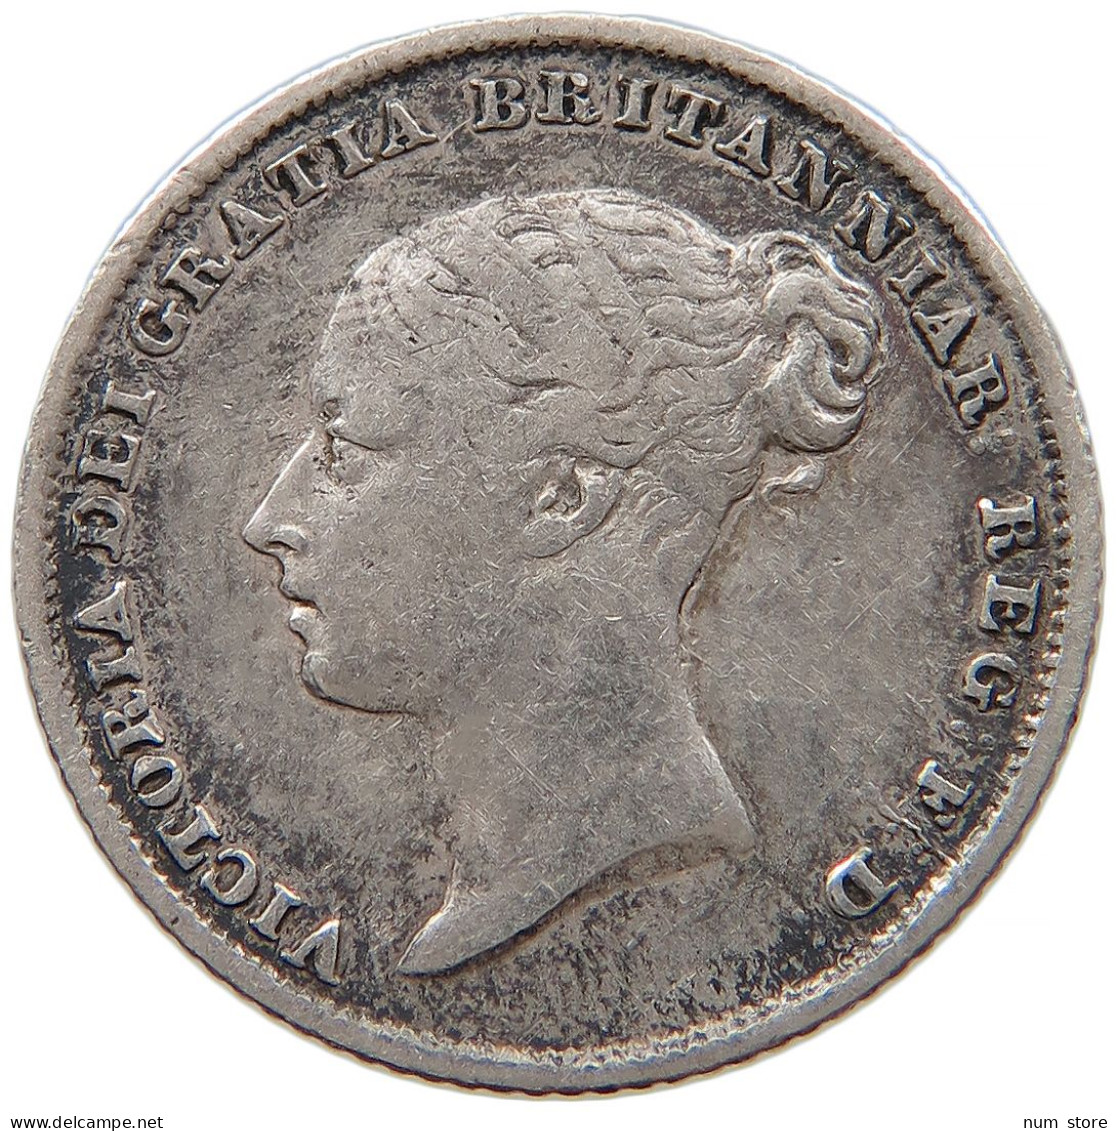 GREAT BRITAIN SIXPENCE 1856 Victoria 1837-1901 #t021 0133 - H. 6 Pence